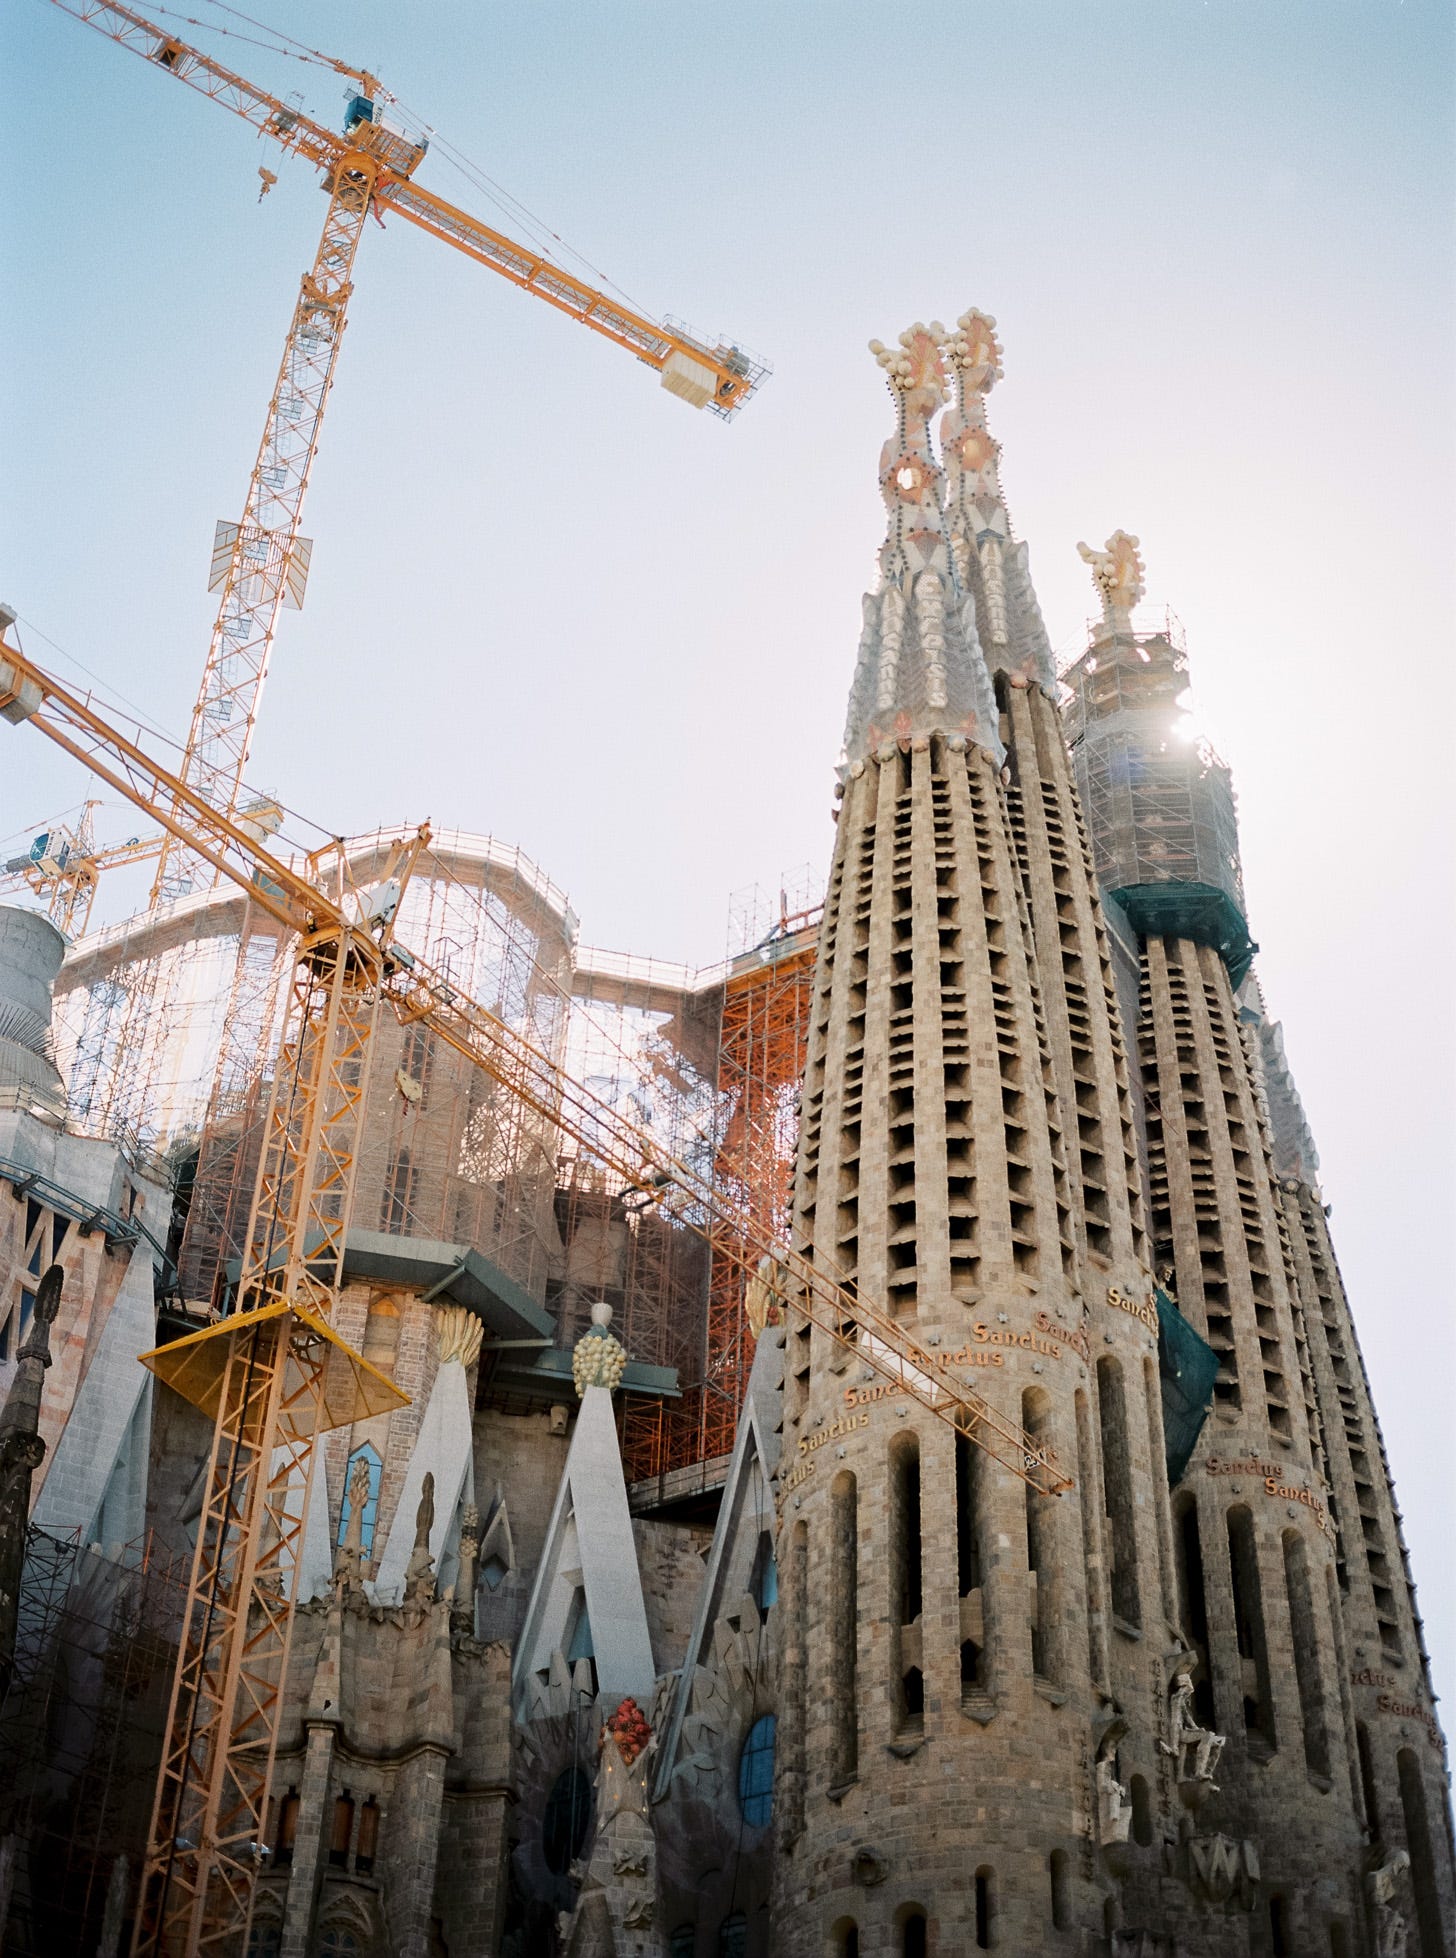 Photo of the Sagrada Familia in Barcelona, surrounding by cranes and scaffolding